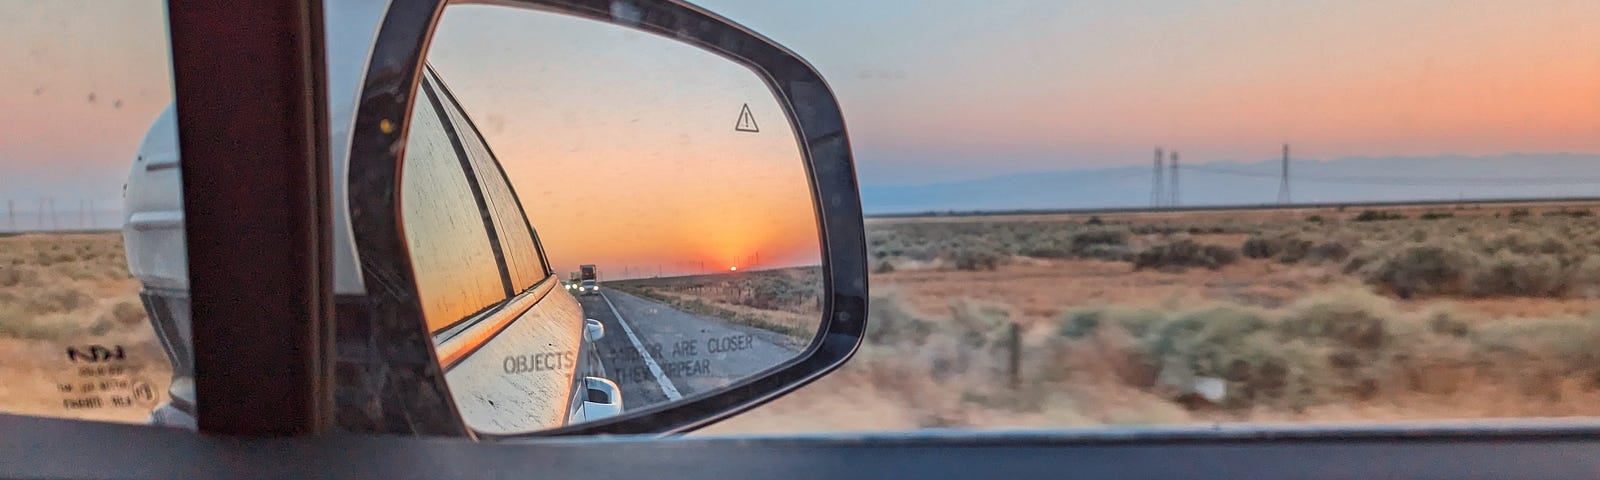 Sunset reflected in a side-view mirror